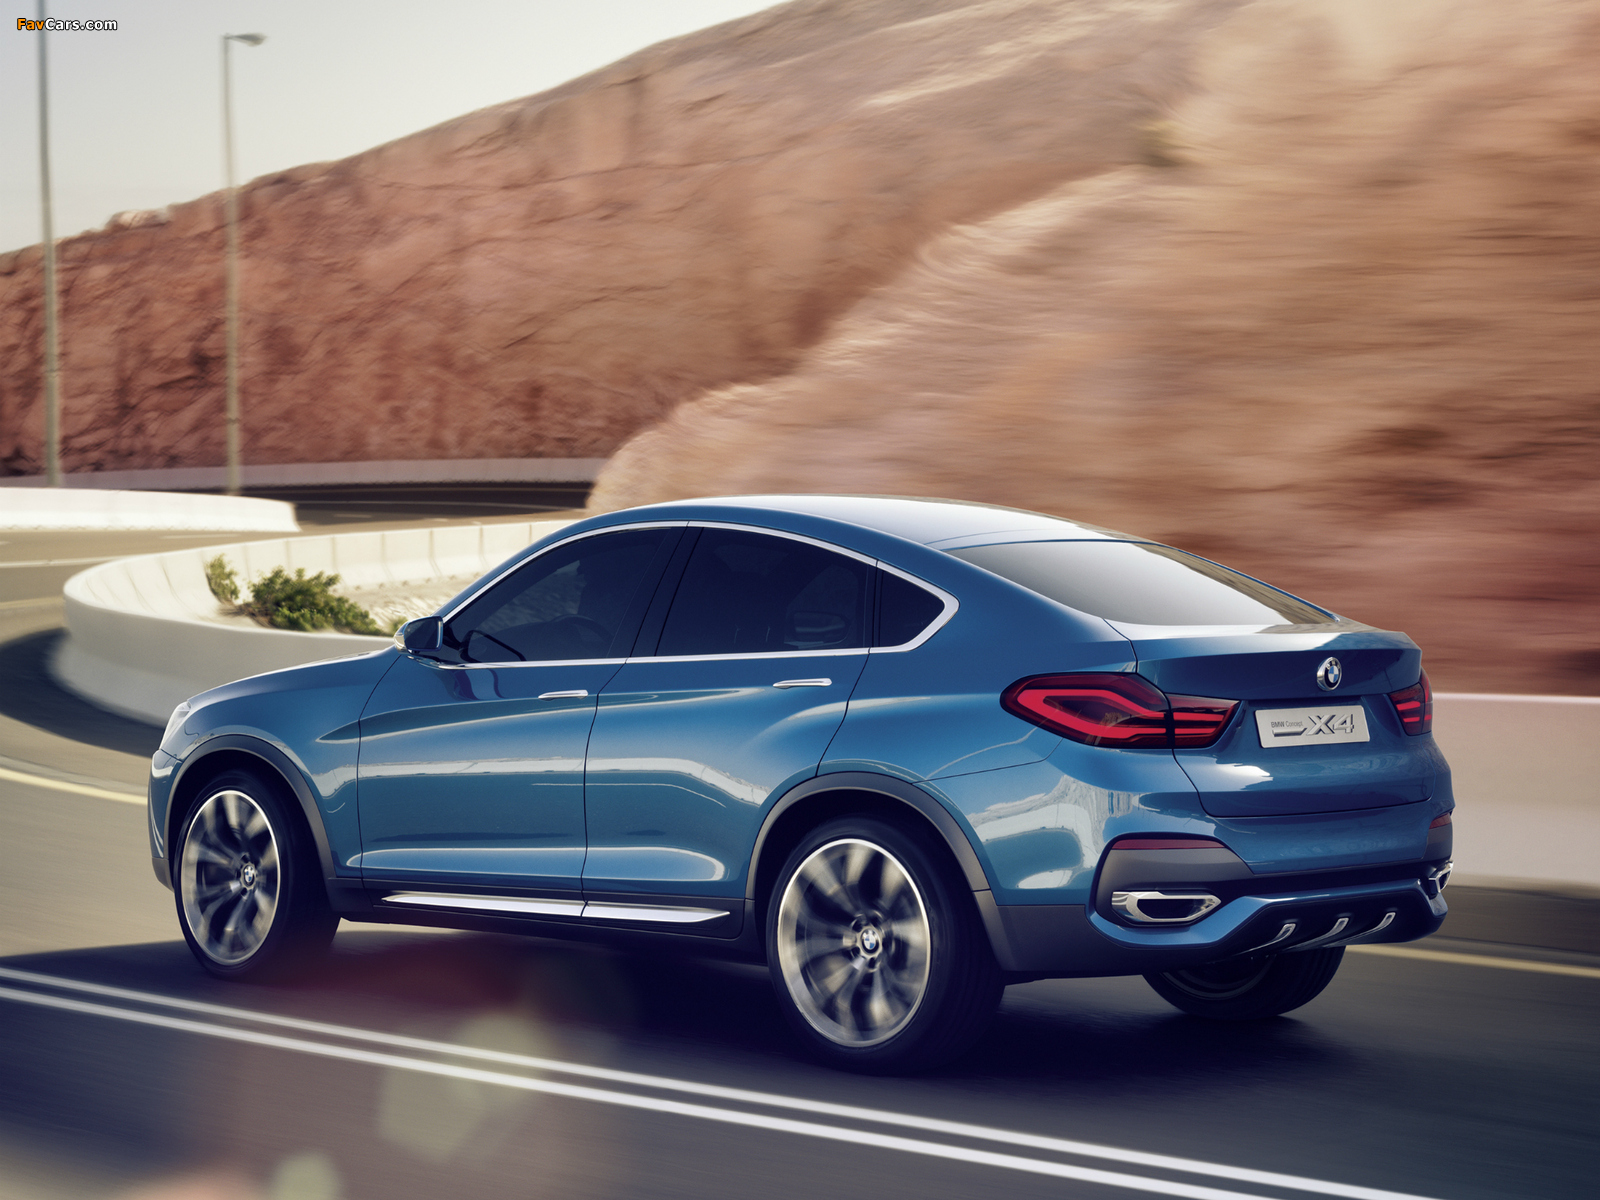 BMW Concept X4 (F26) 2013 pictures (1600 x 1200)